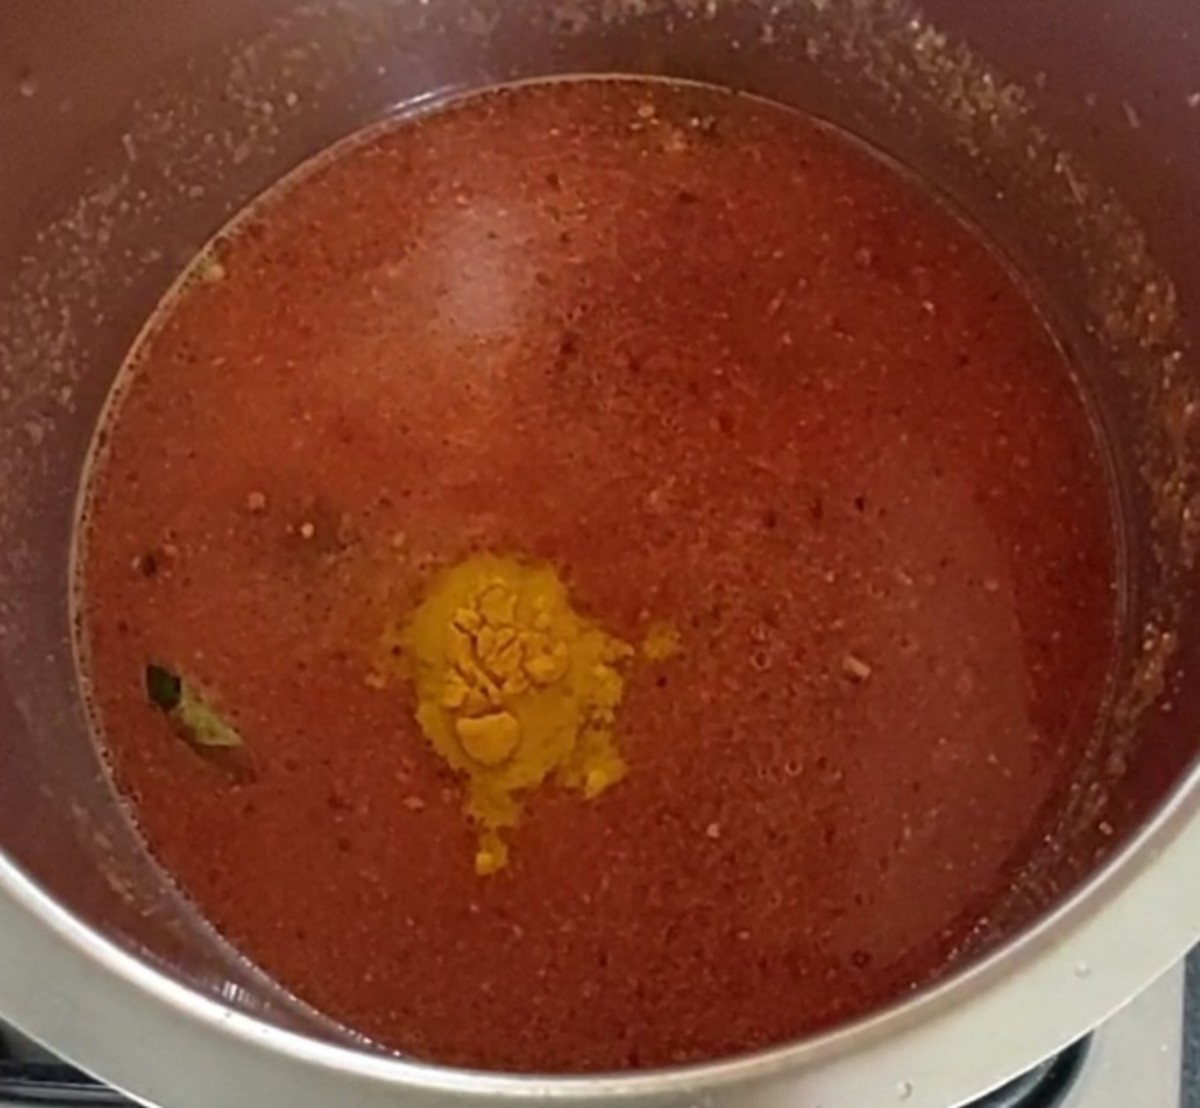 Add 1 cup of water and mix well. Add 1/2 teaspoon turmeric powder.